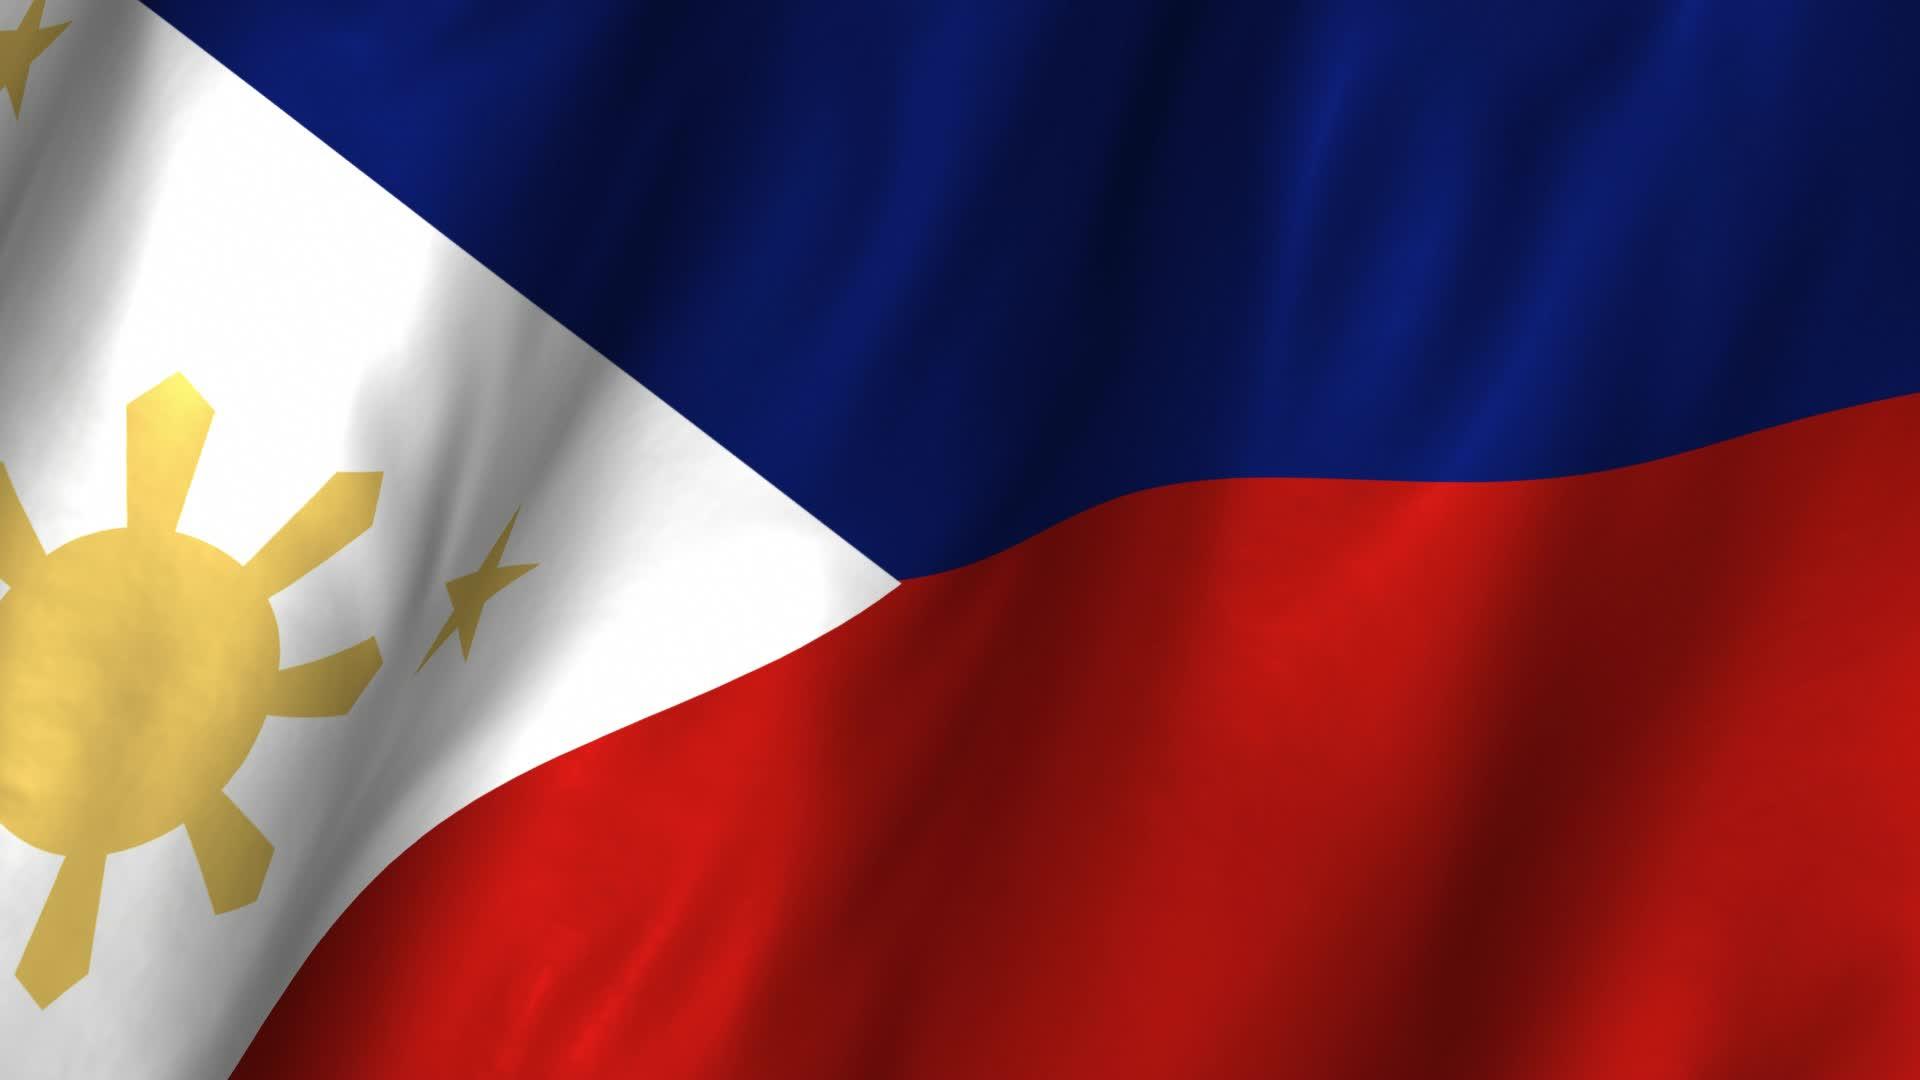 Philippine Flag Wallpaper Waving Picture Of Flag Imageco.Org